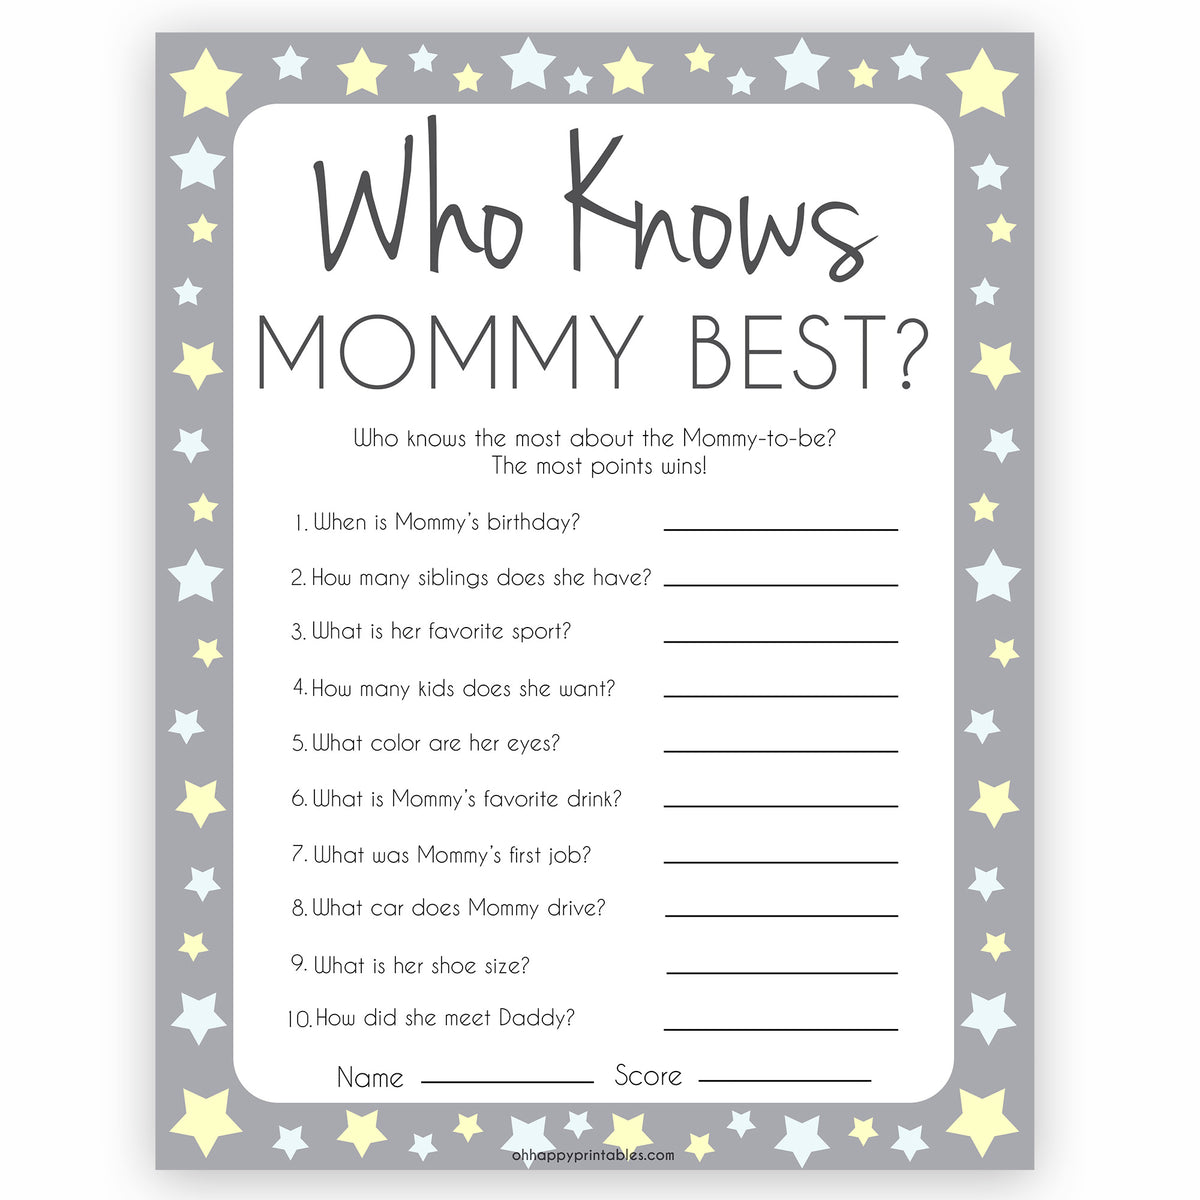 who-knows-mommy-best-game-grey-yellow-printable-baby-shower-games-ohhappyprintables